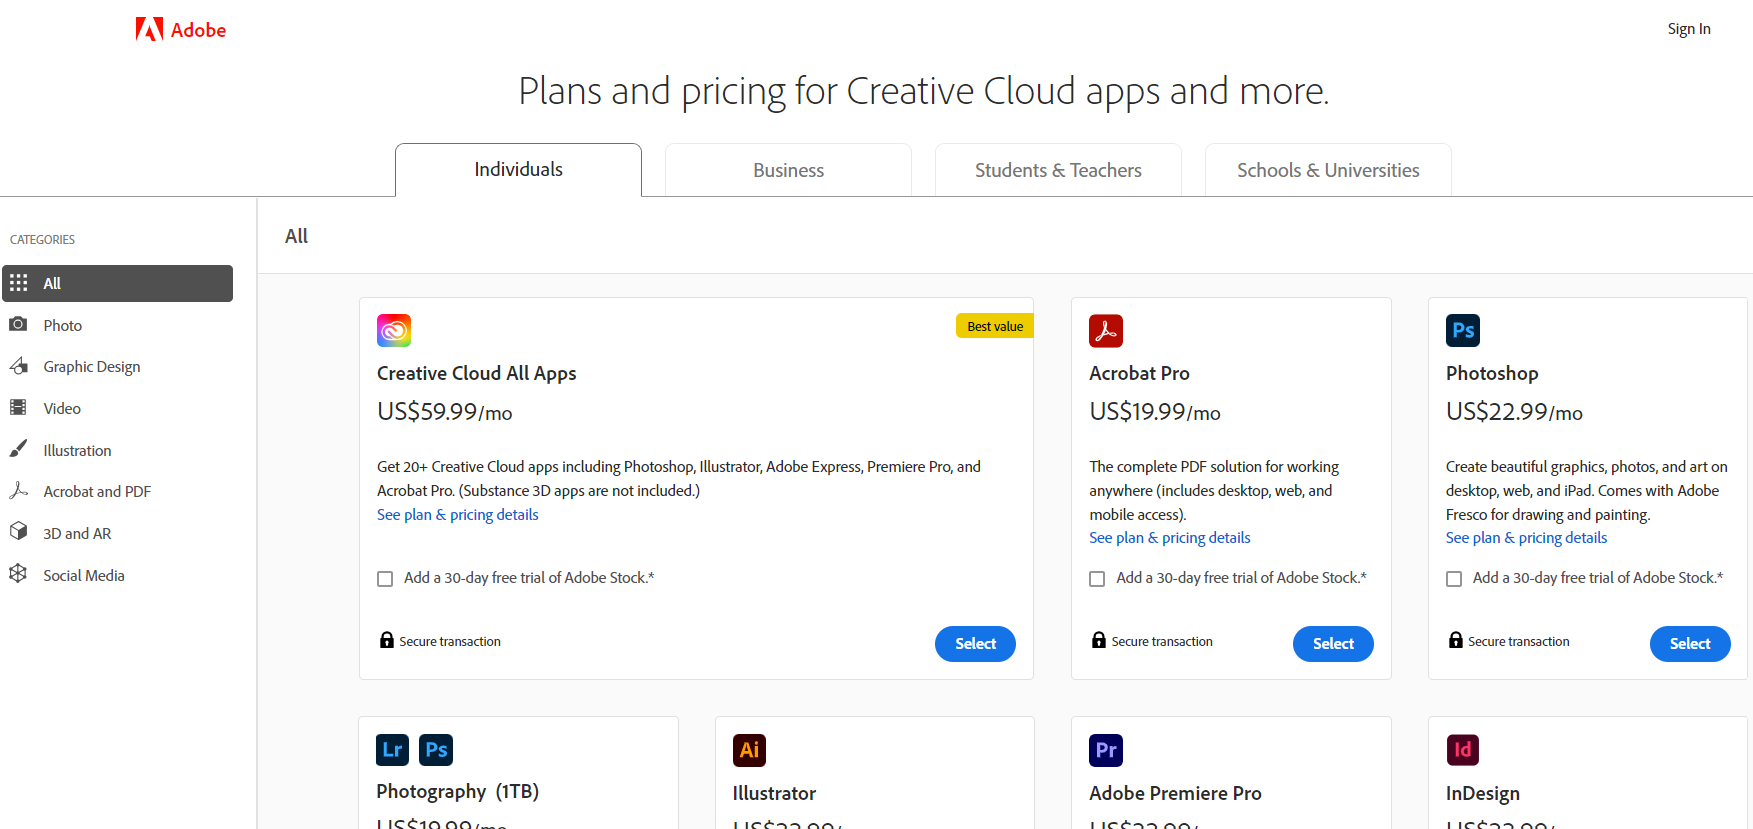 Adobe pricing page